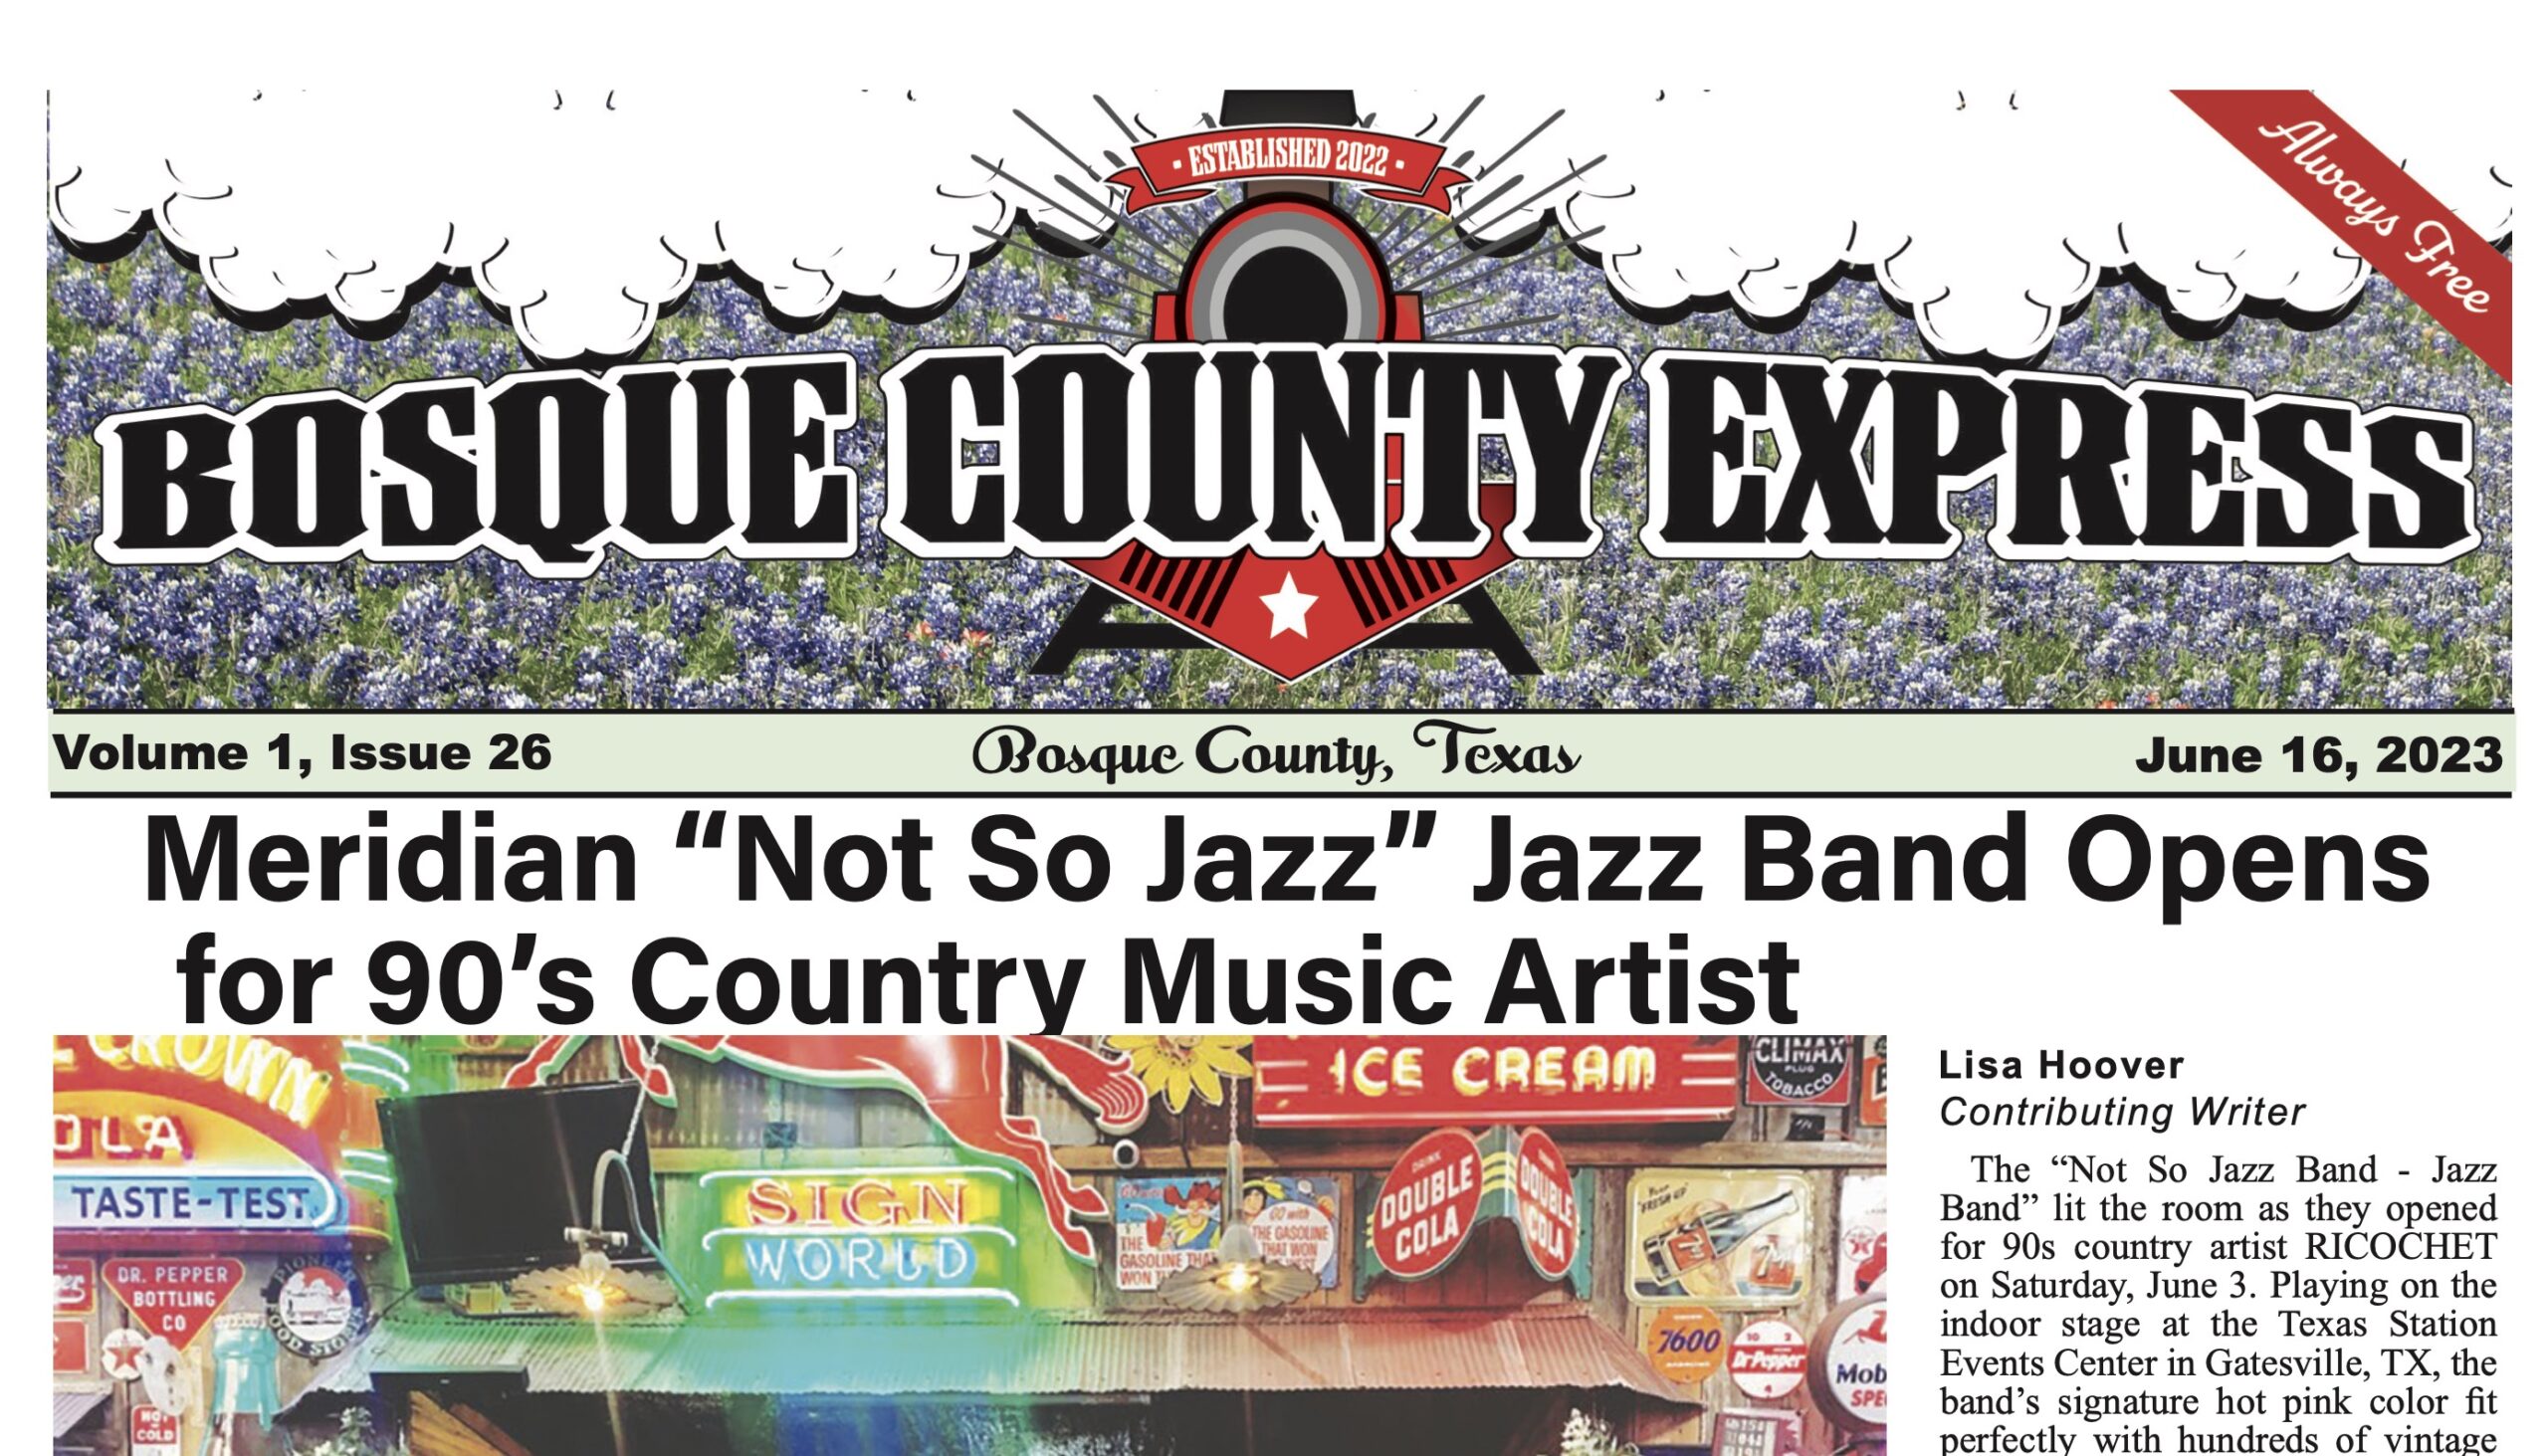 Bosque County Express Print Edition for June 16, 2023